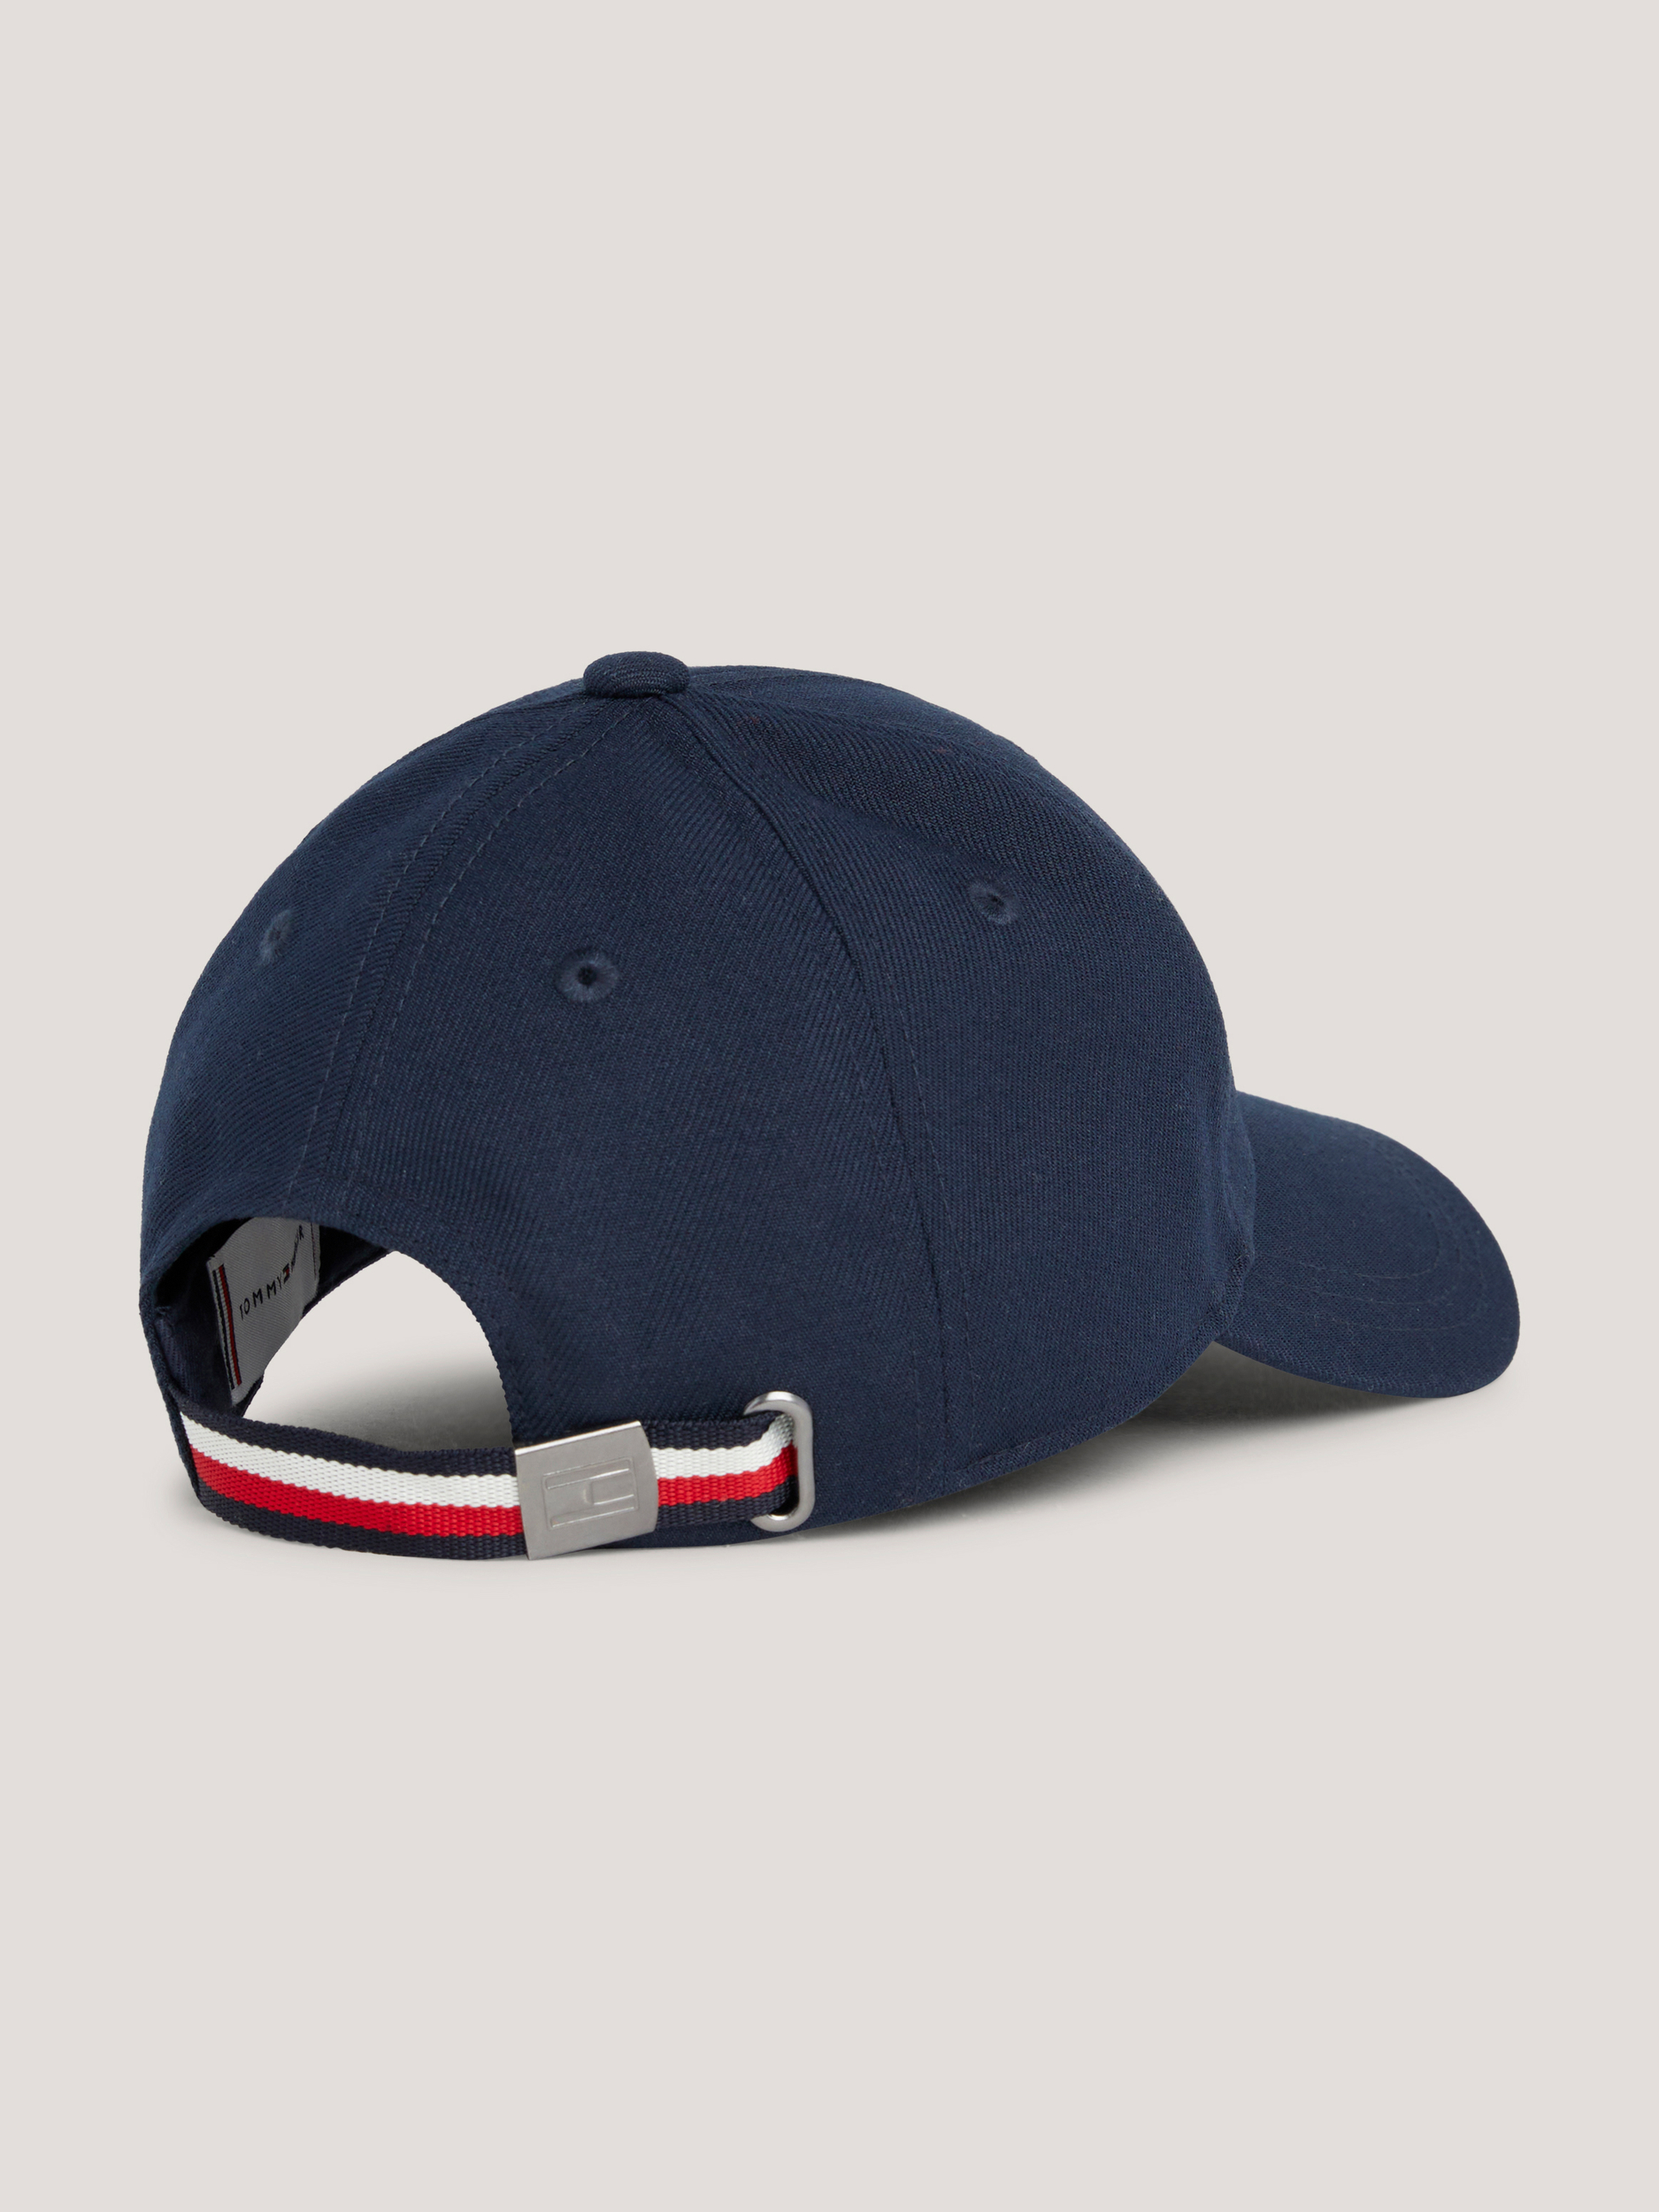 casquette-tommy-hilfiger-montreal-navy (2)